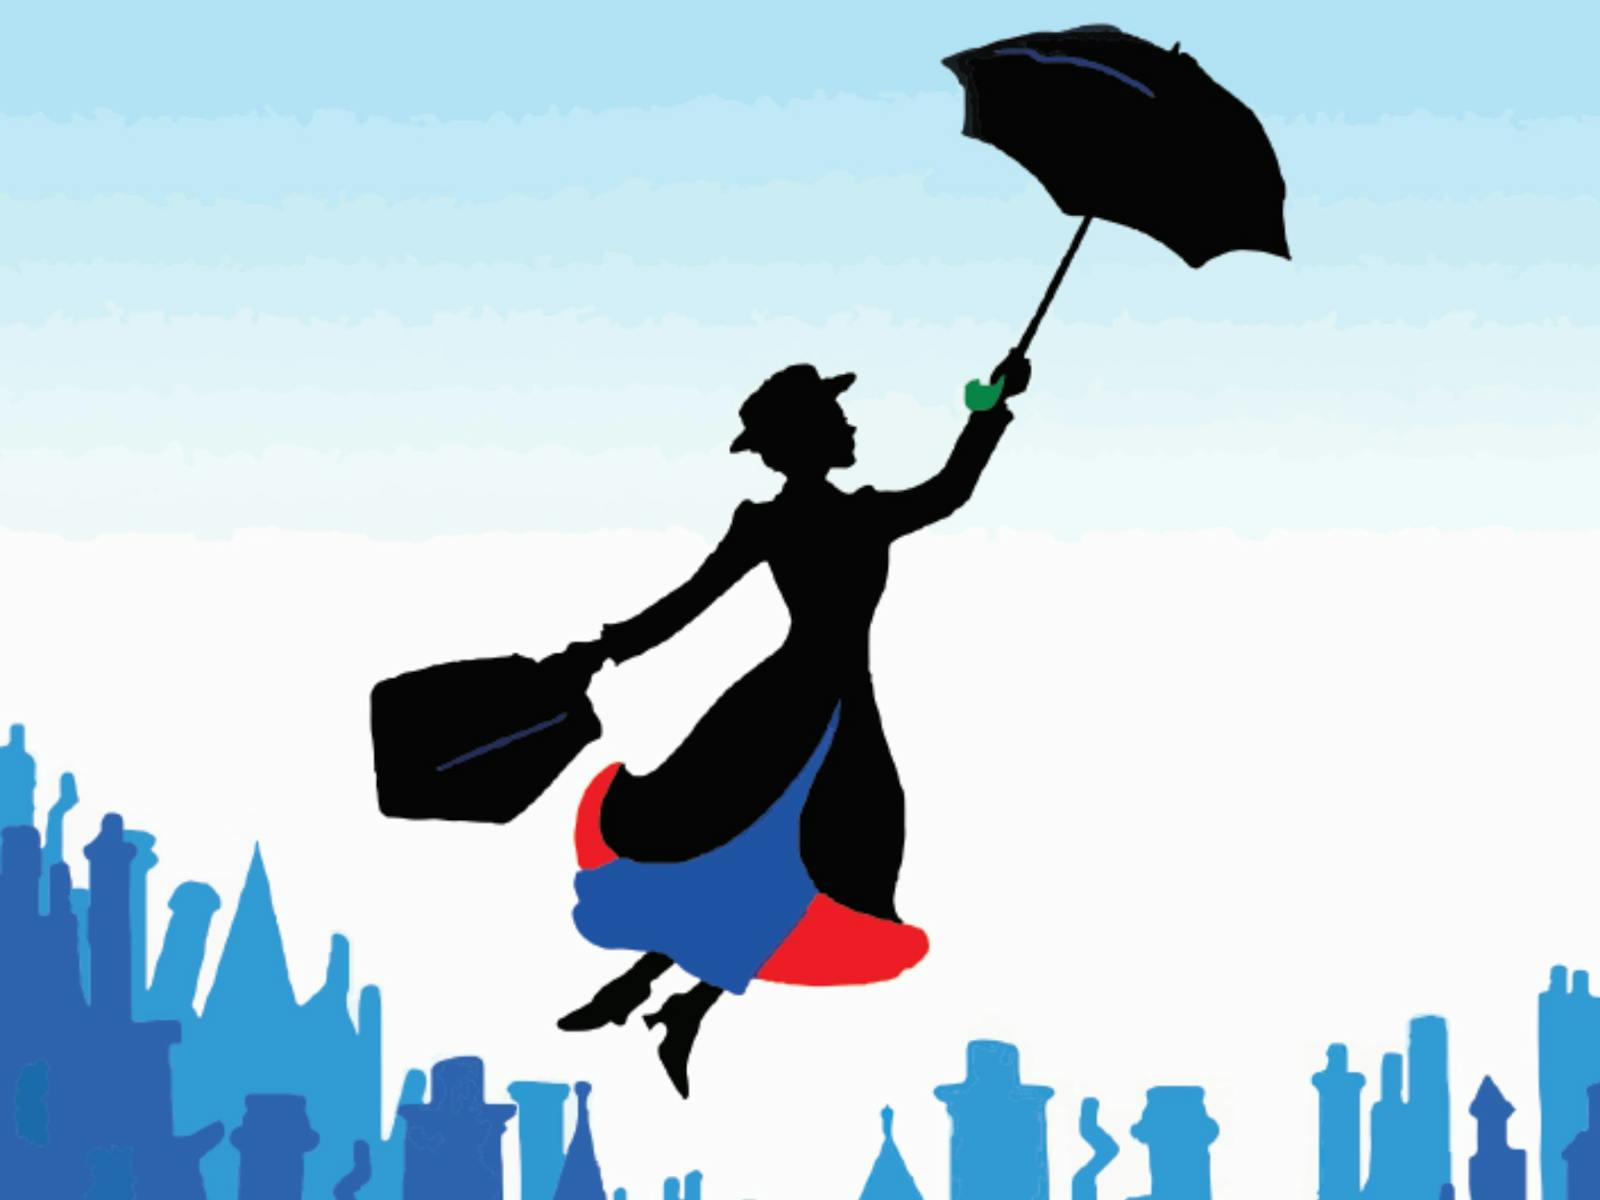 Image for Trinity Anglican College presents Mary Poppins